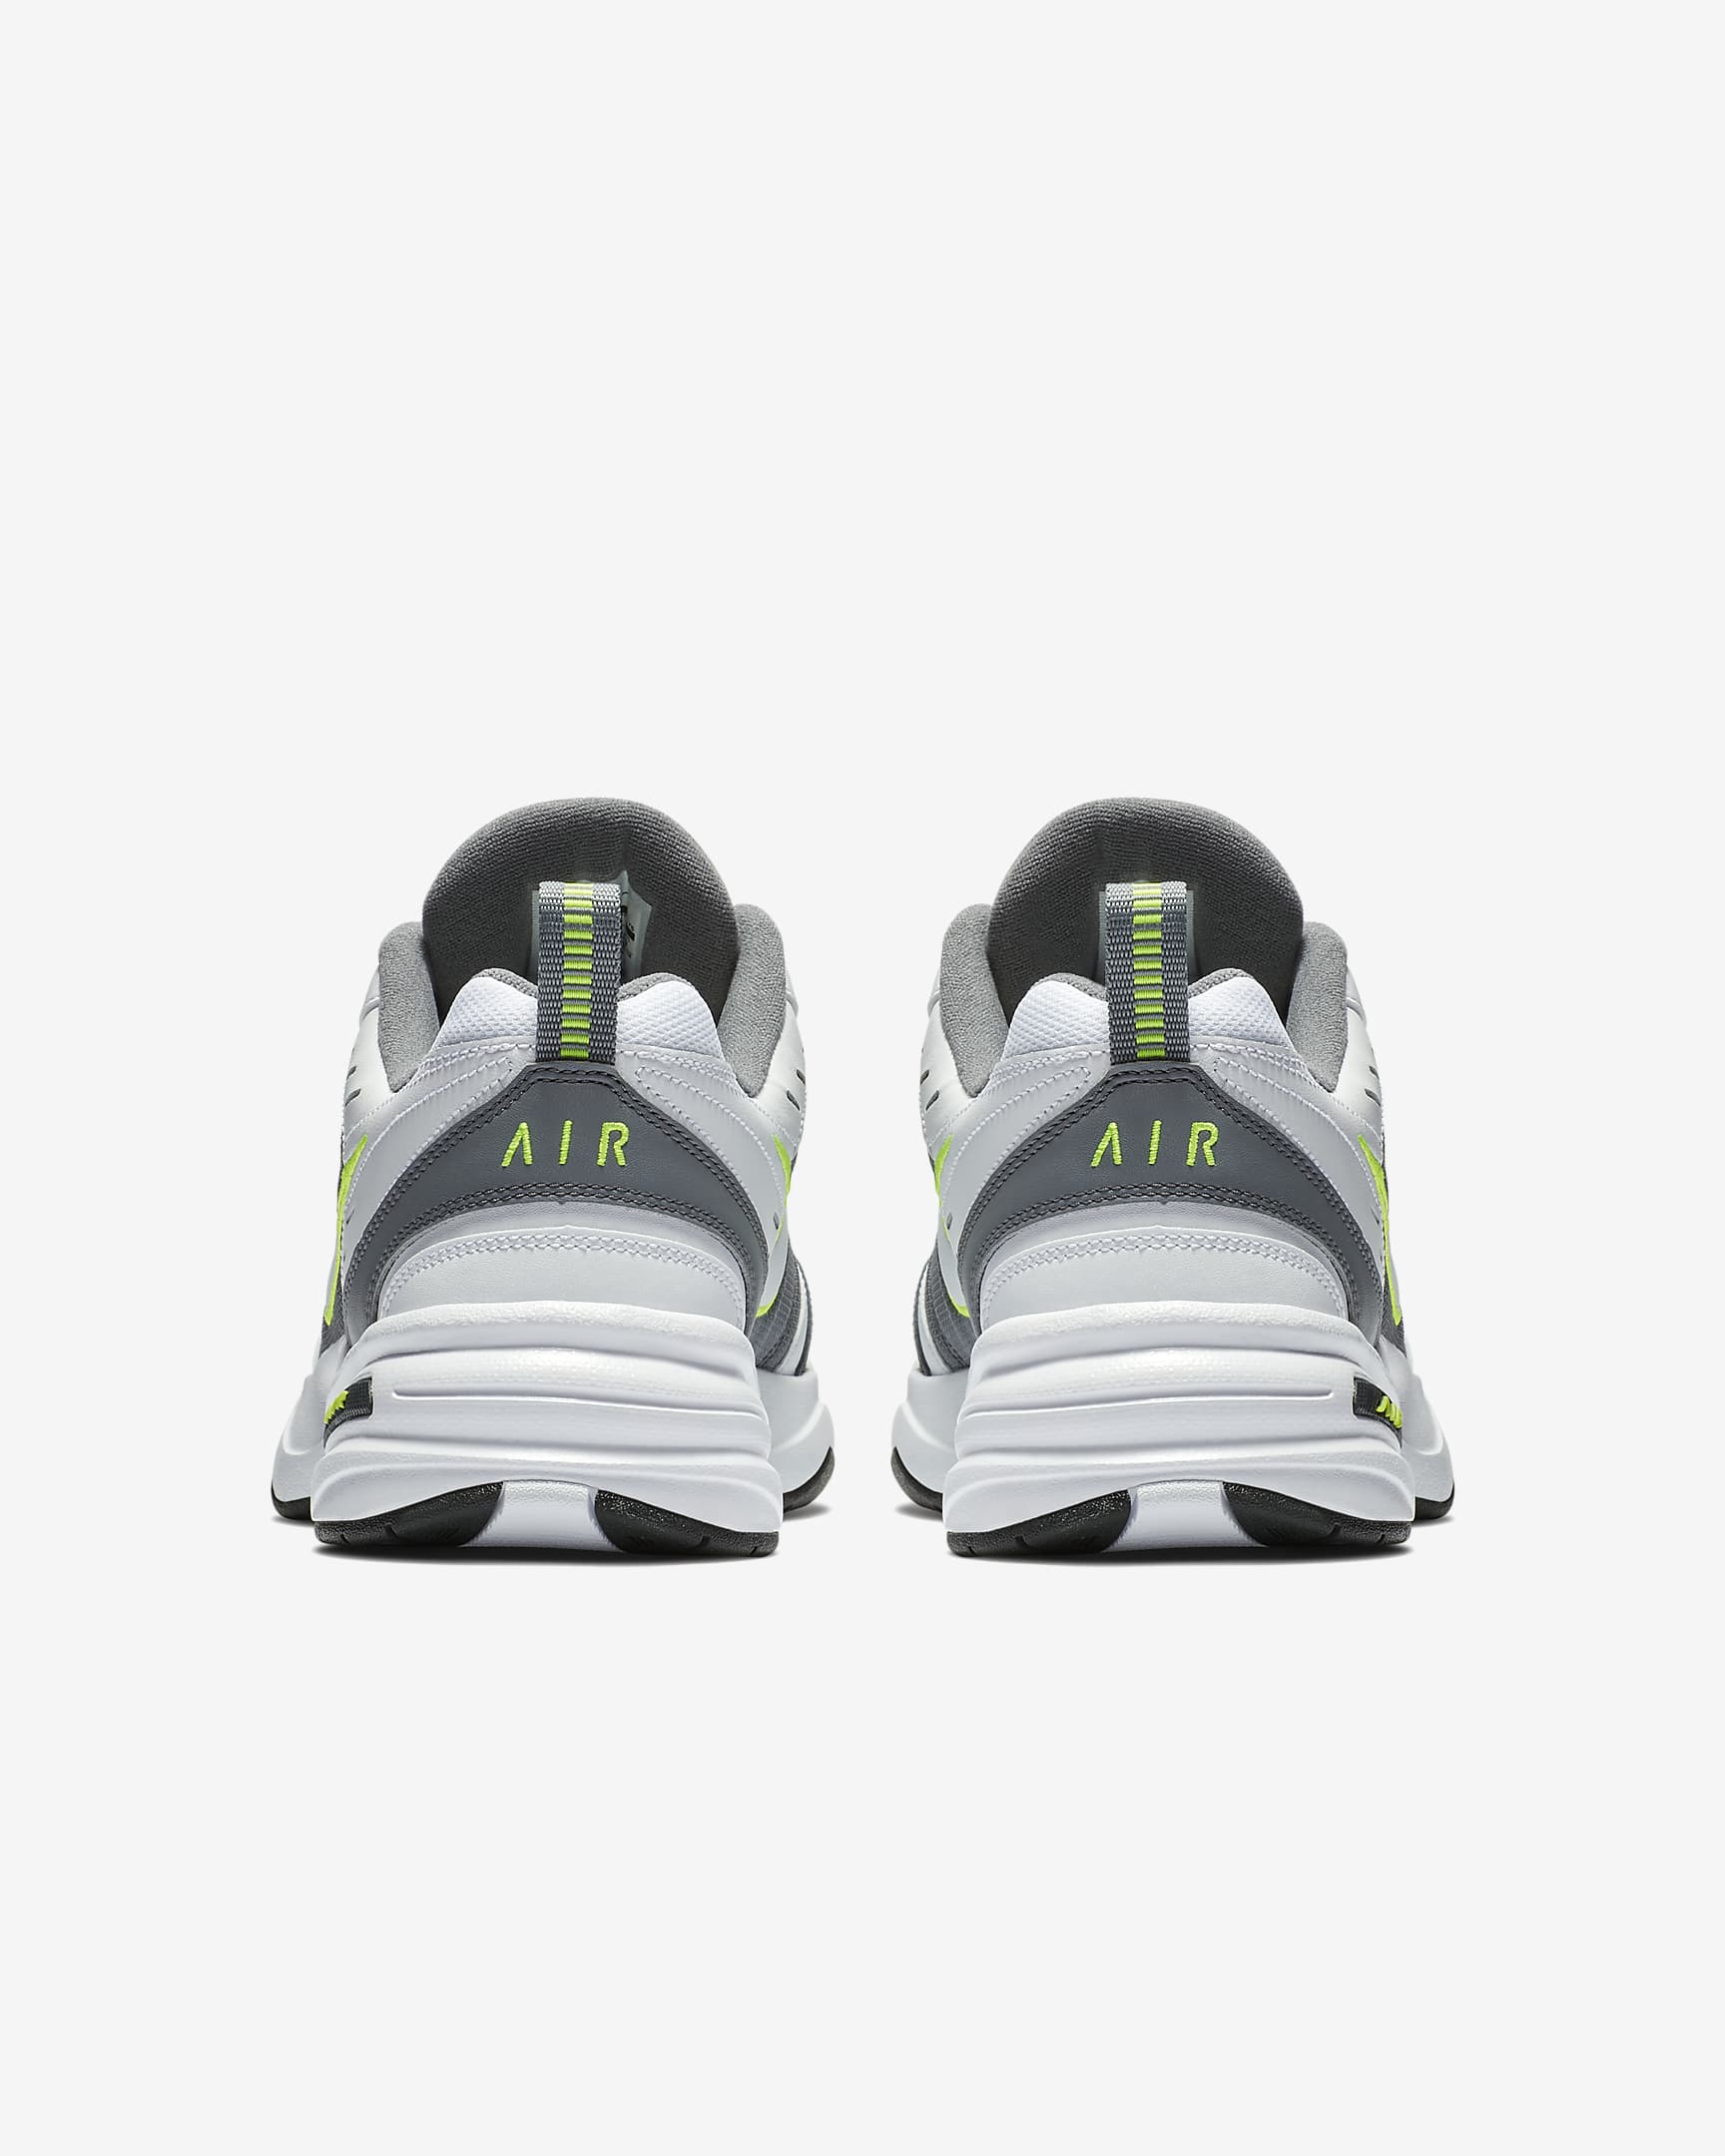 Nike Air Monarch IV Men's Workout Shoes - White/Cool Grey/Anthracite/White